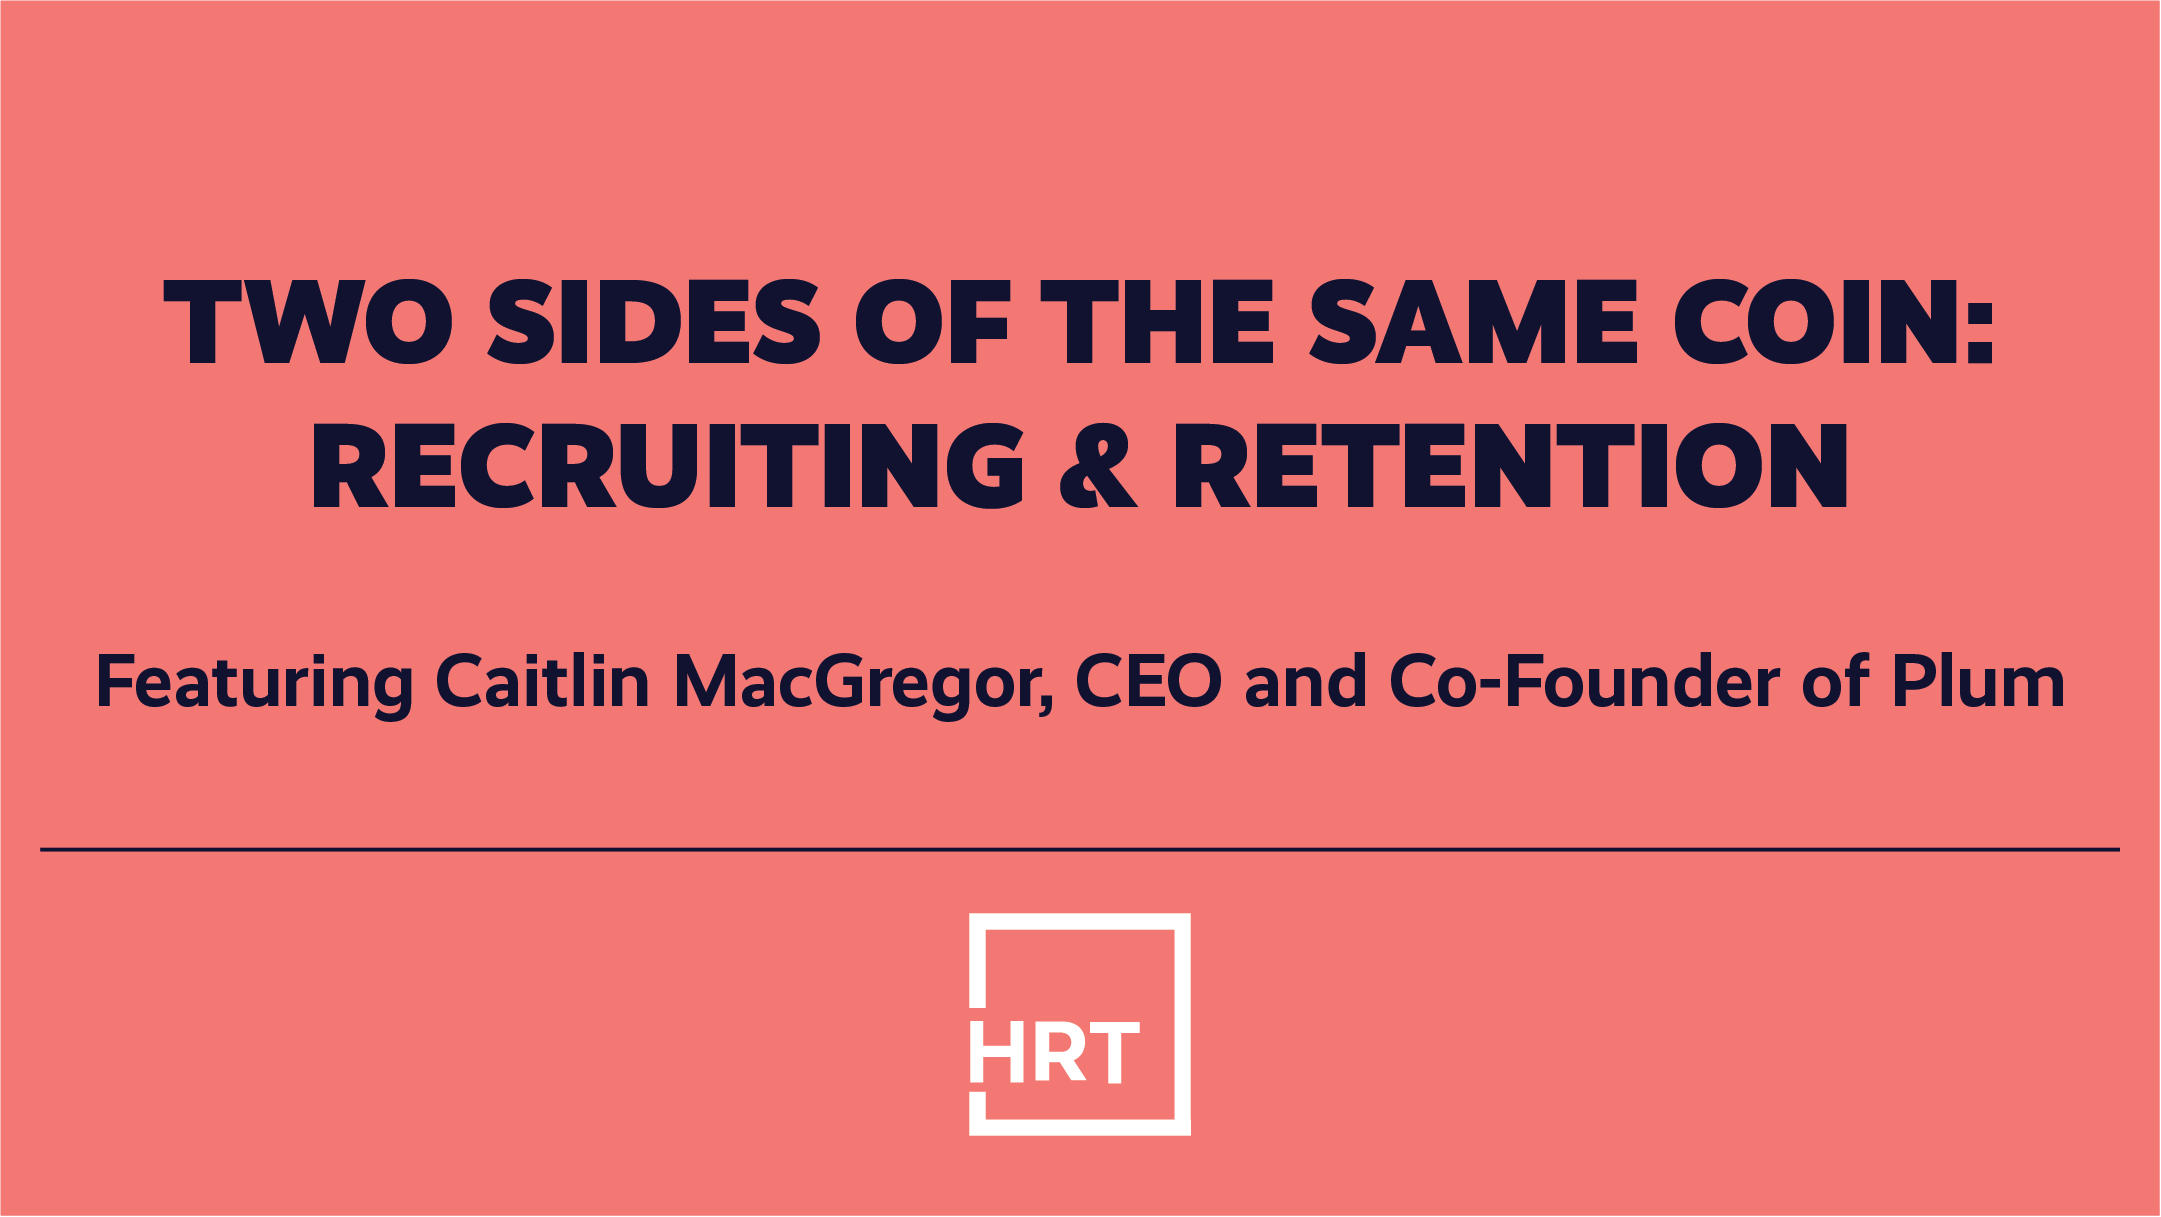 Two Sides of the Same Coin: Recruiting & Retention